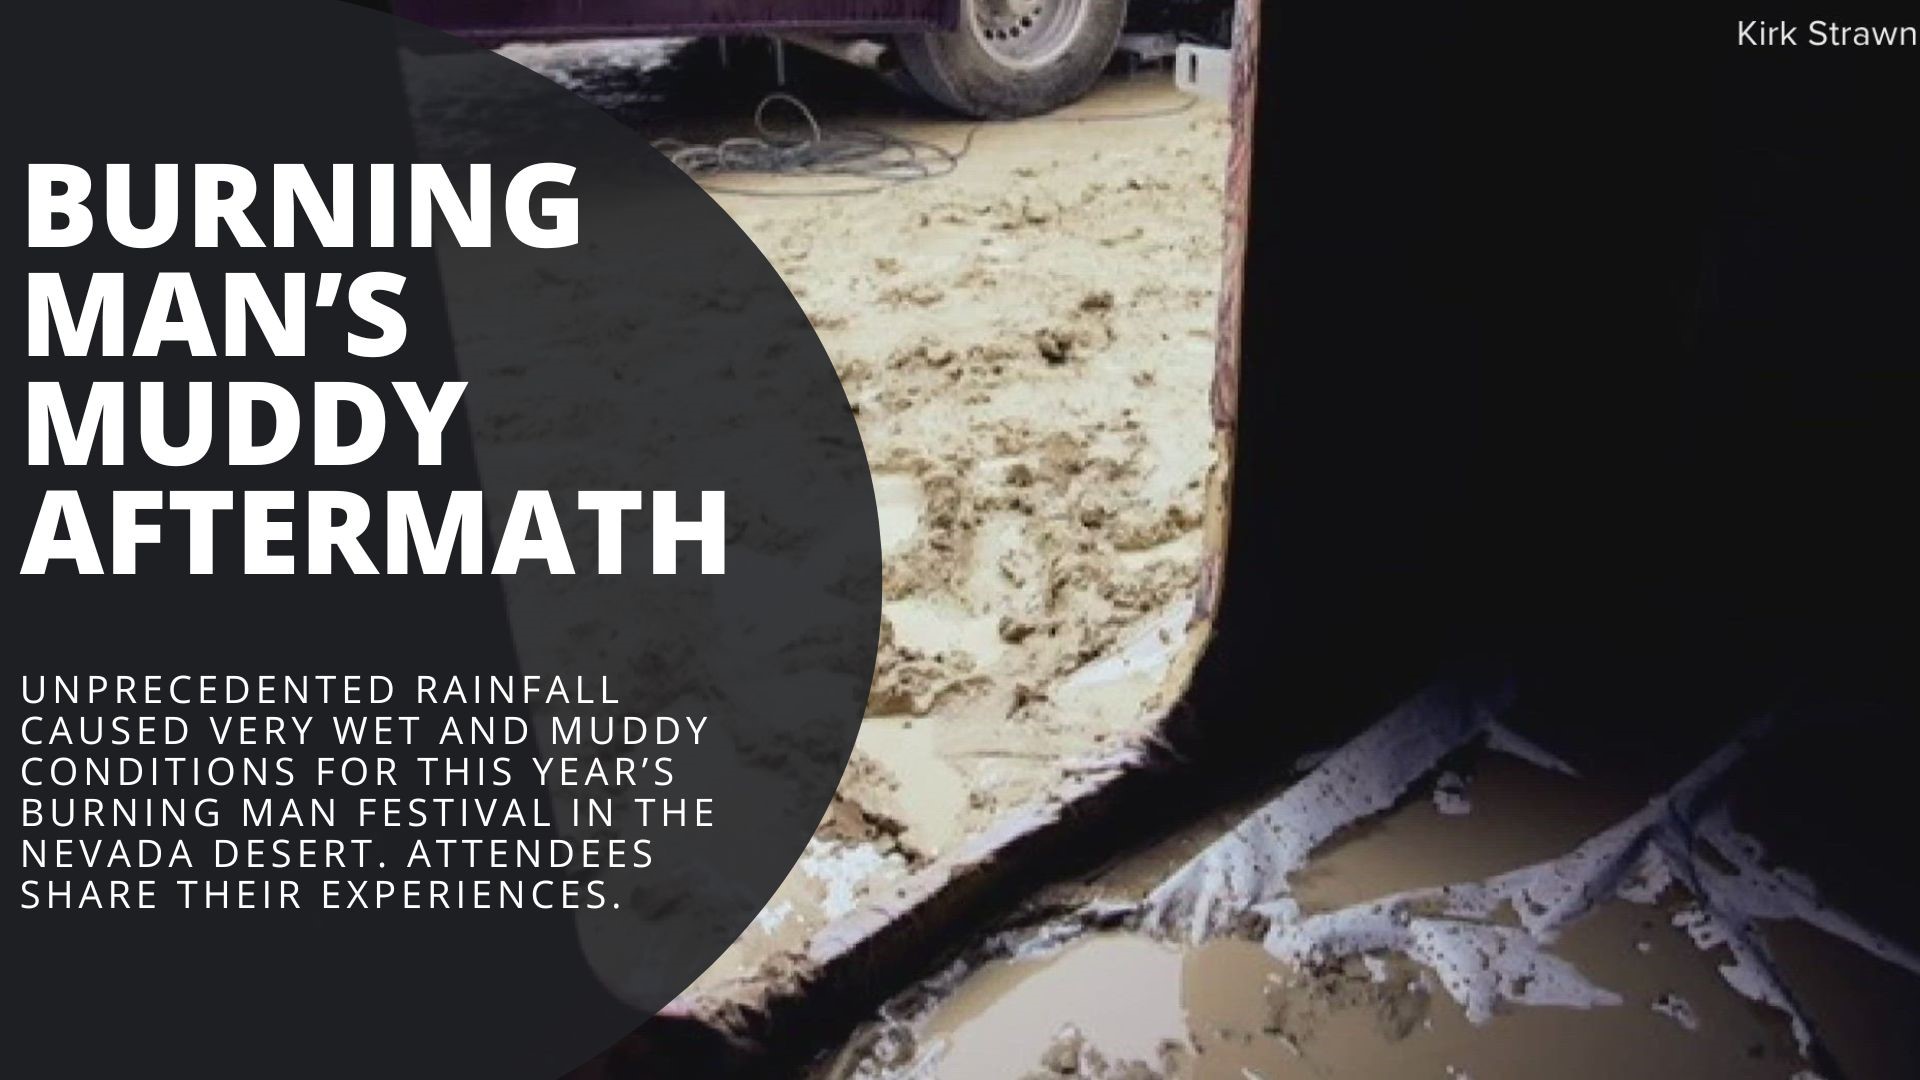 Unprecedented rainfall caused very wet and muddy conditions for this year’s burning man festival in the Nevada desert. Attendees share their experiences.